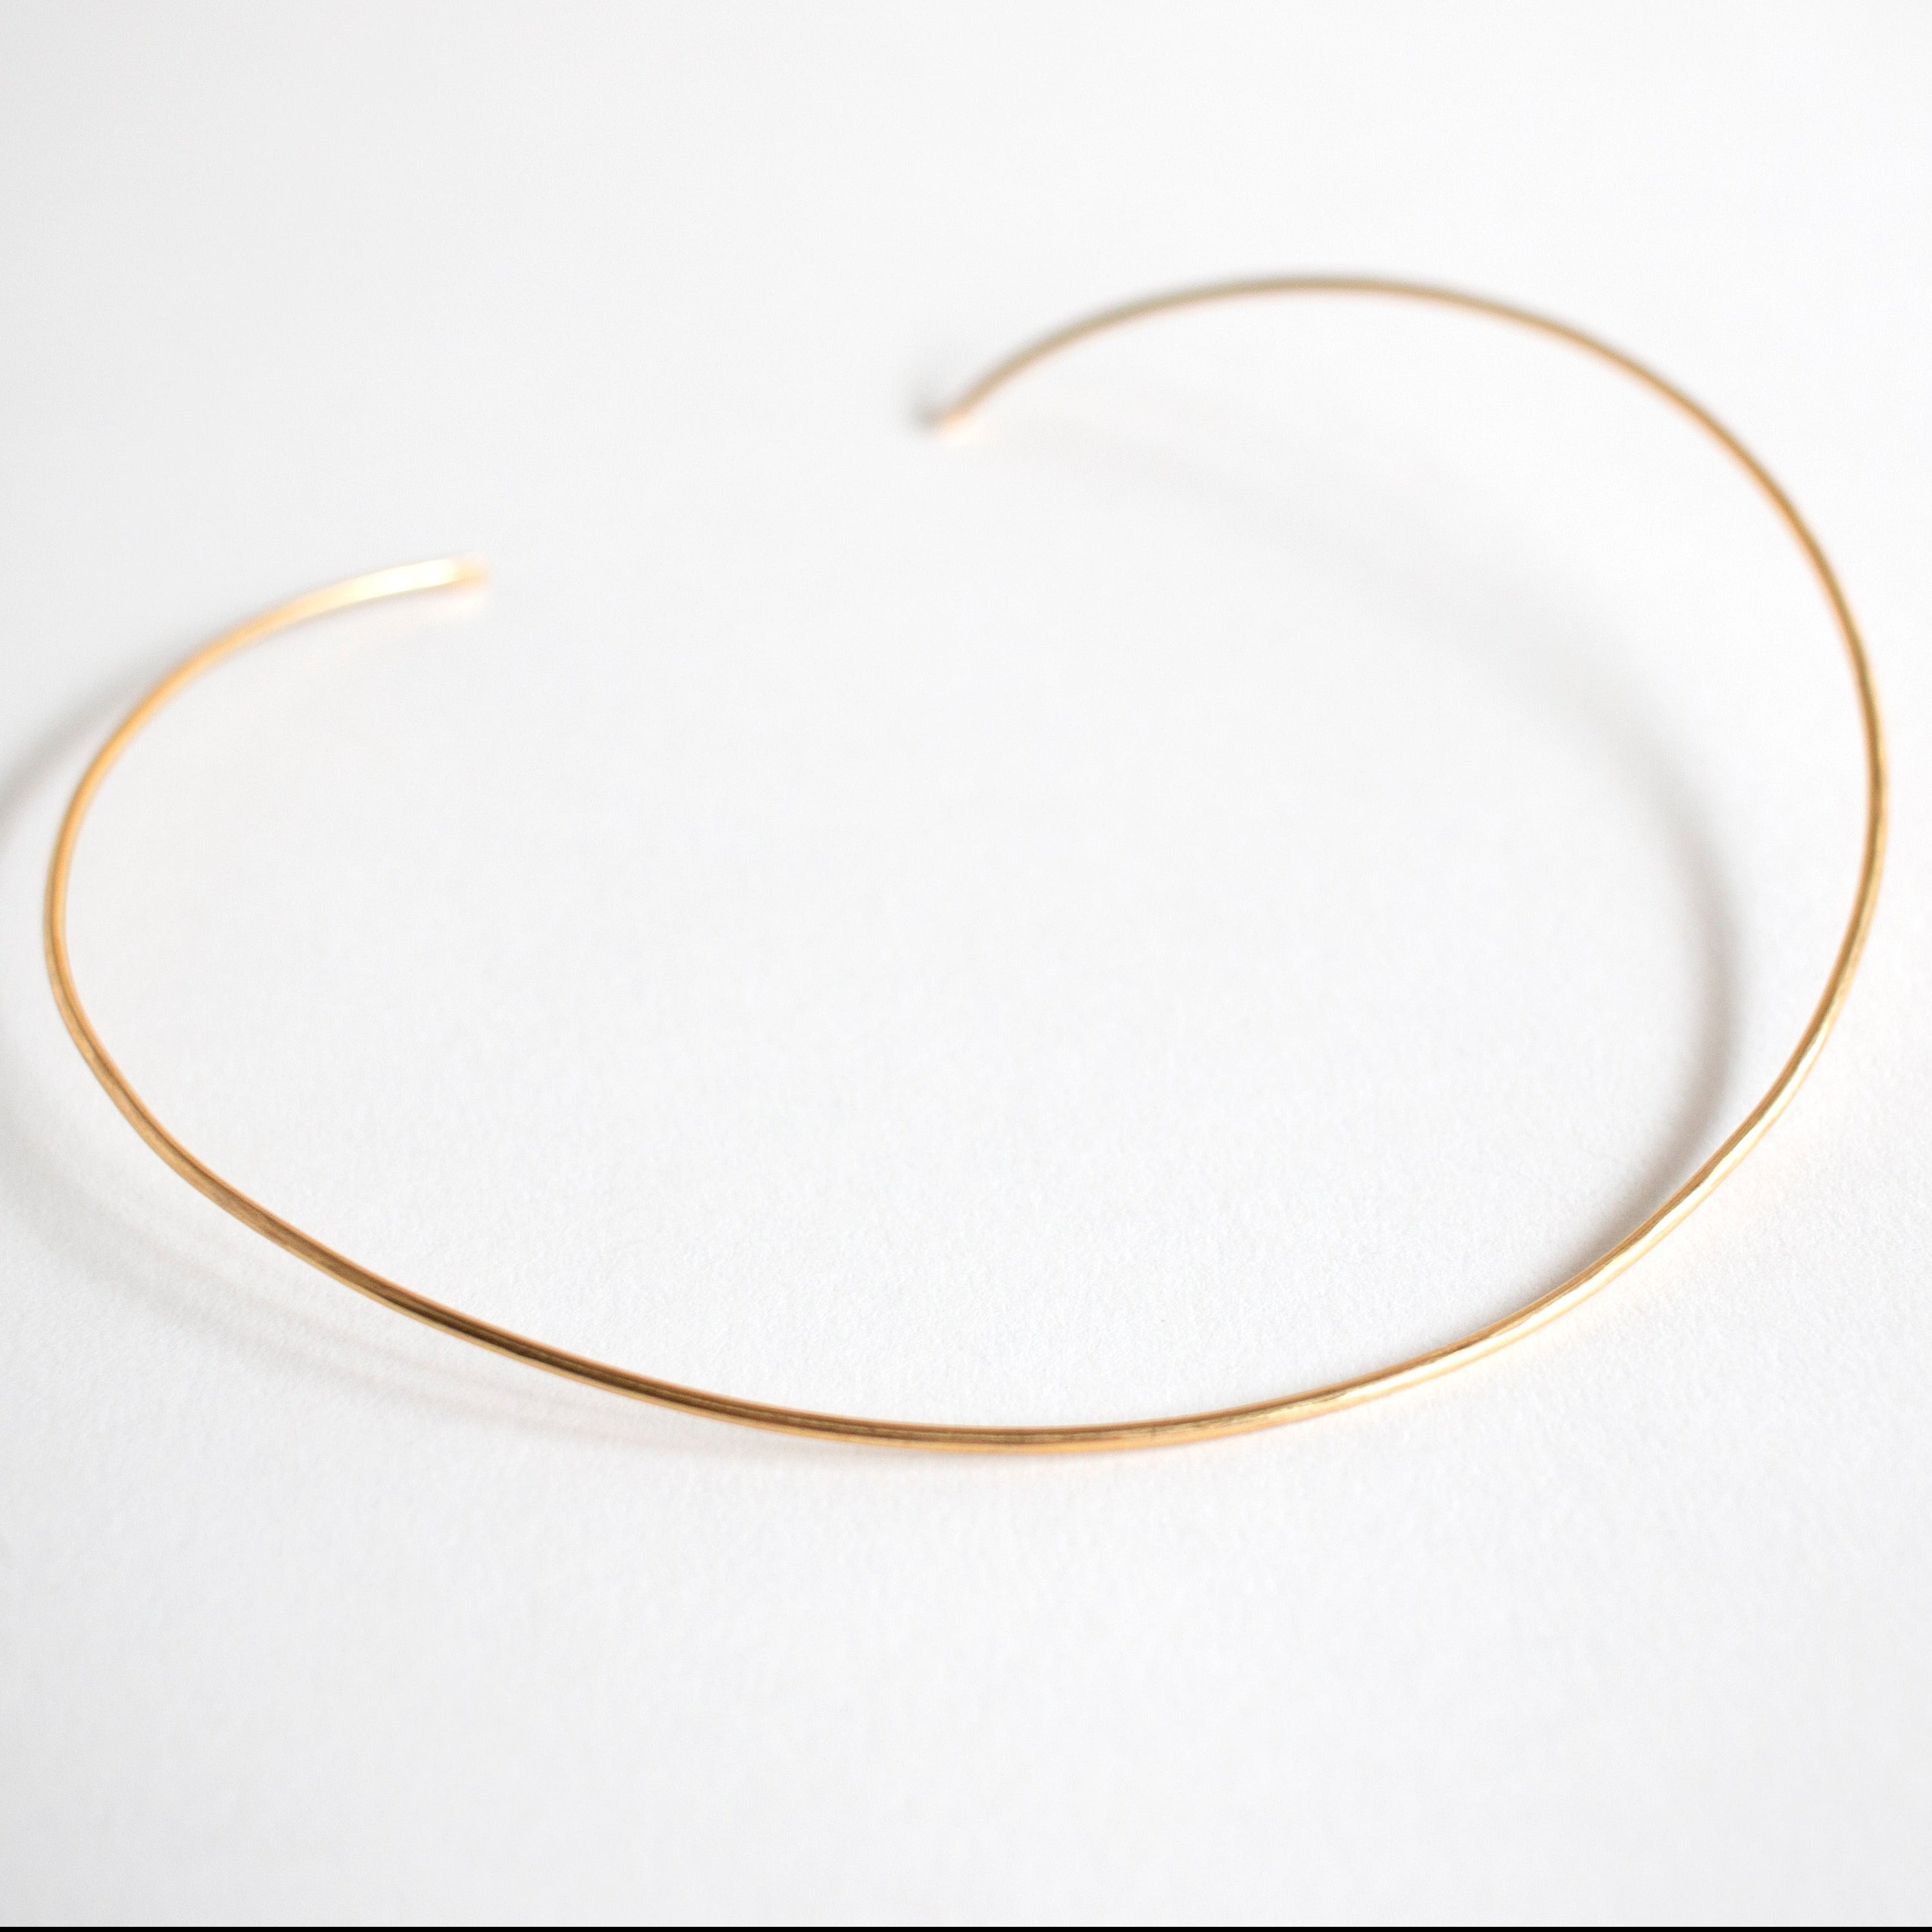 Delicate gold necklace, brass necklace, brass collar necklace, gold choker, delicate choker, boho jewelry, minimalist jewelry, gold necklace, romantic gift, bridesmaid jewelry, bridesmaid necklace, simple necklace, everyday jewelry, gold jewelry